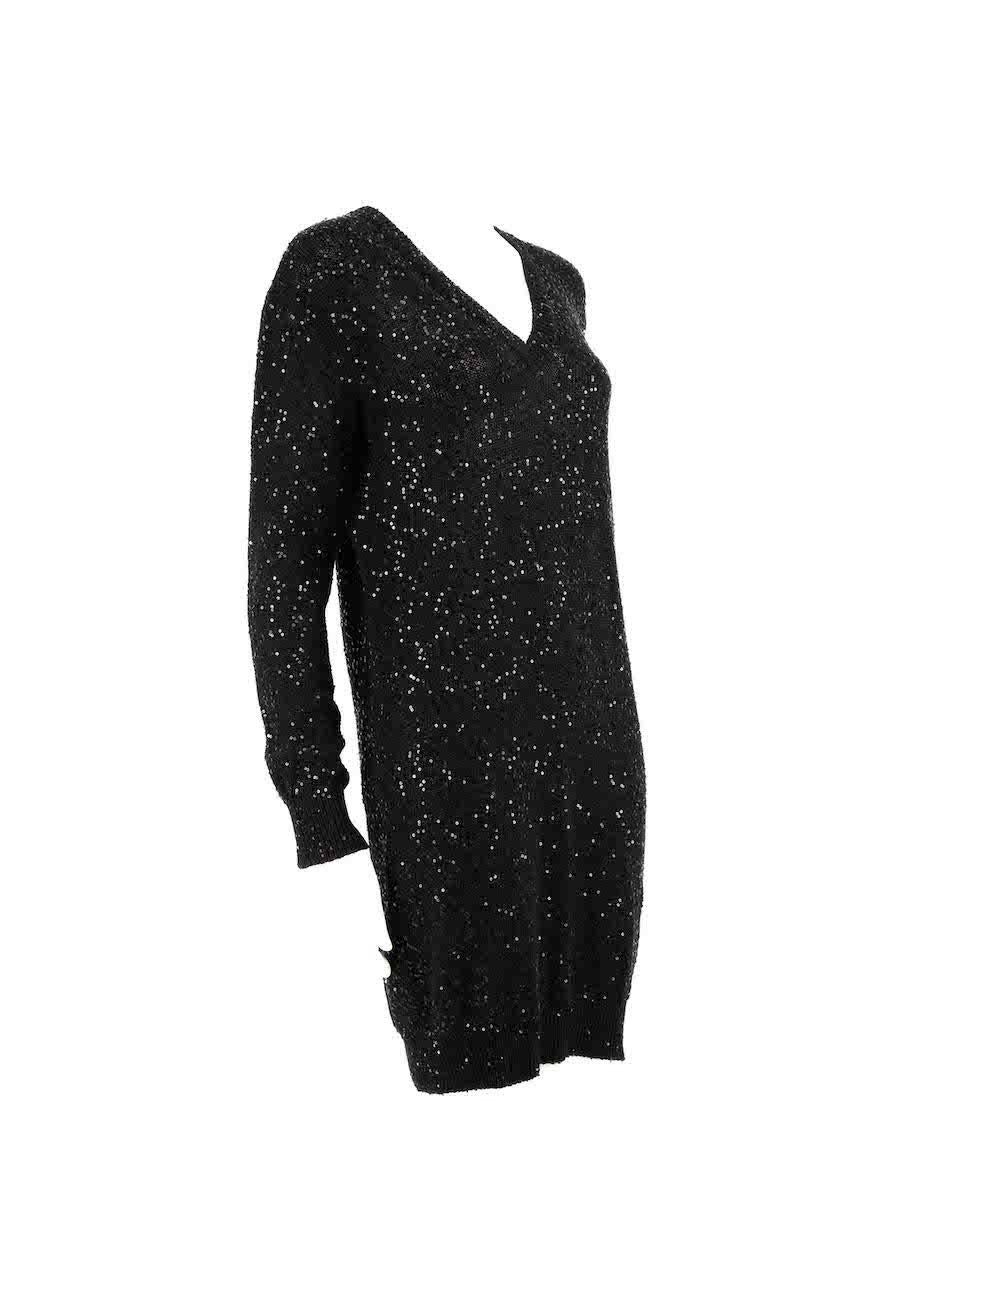 Condition
 
 CONDITION is Very good. Hardly any visible wear to dress is evident on this used Stella McCartney designer resale item.
 
 Details
 
 
 
 Black
 
 Cotton
 
 Knit dress
 
 Sequinned
 
 V-neck
 
 Long sleeves
 
 Mini
 
 
 
 
 
 Size: (M)